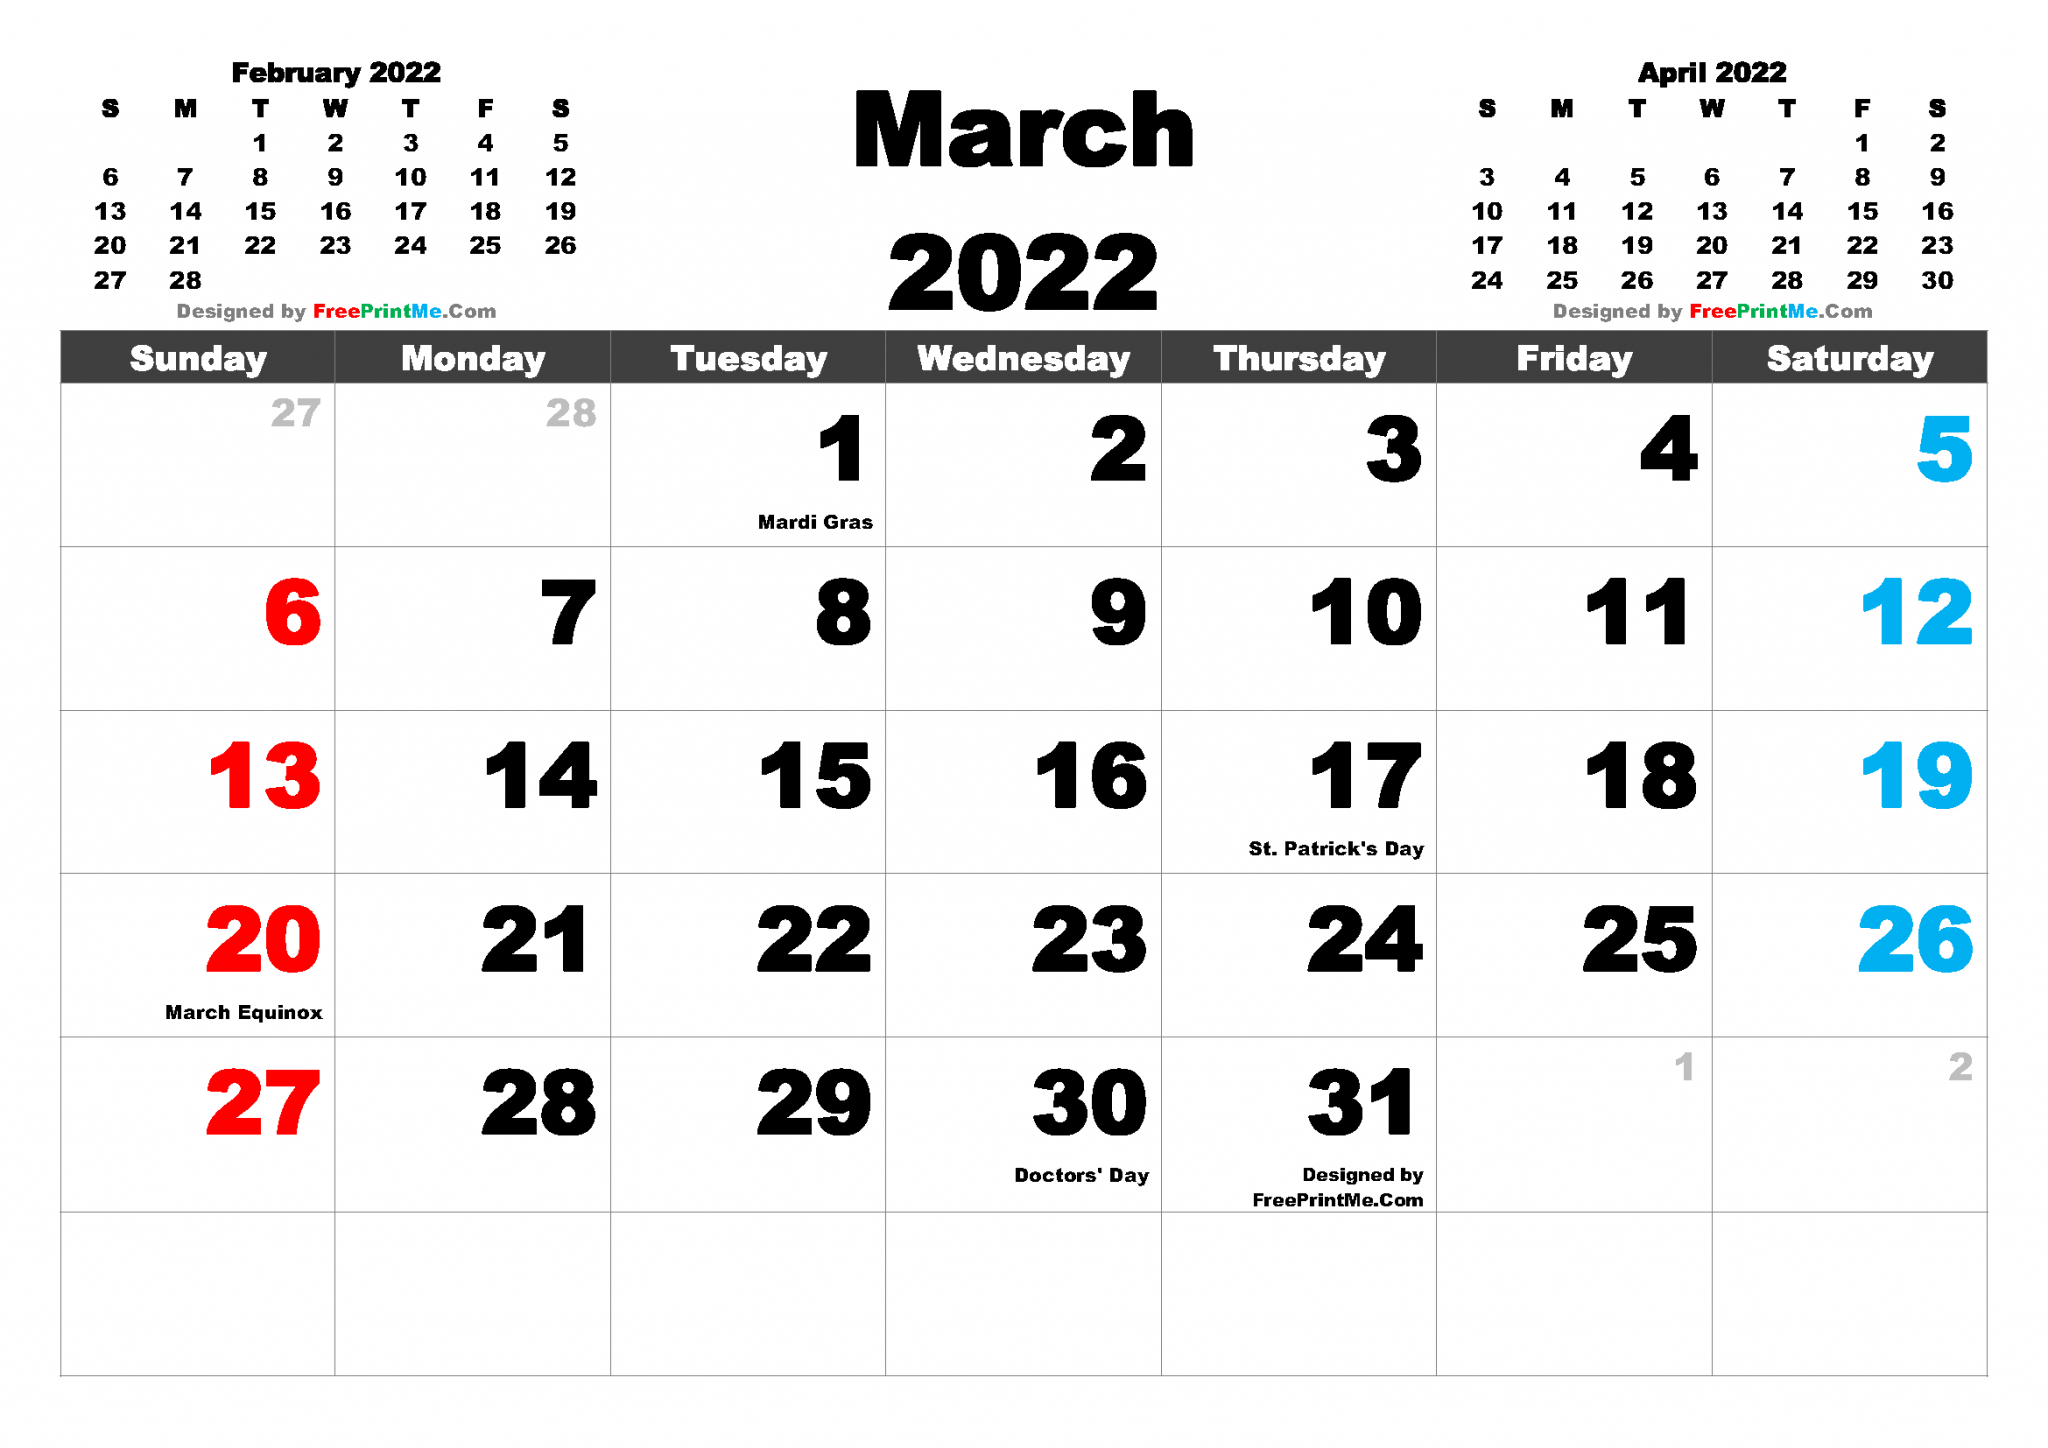 Free Printable March 2022 Calendar Pdf Png Image in Free 2022 Monthly Calendars That Are Printable